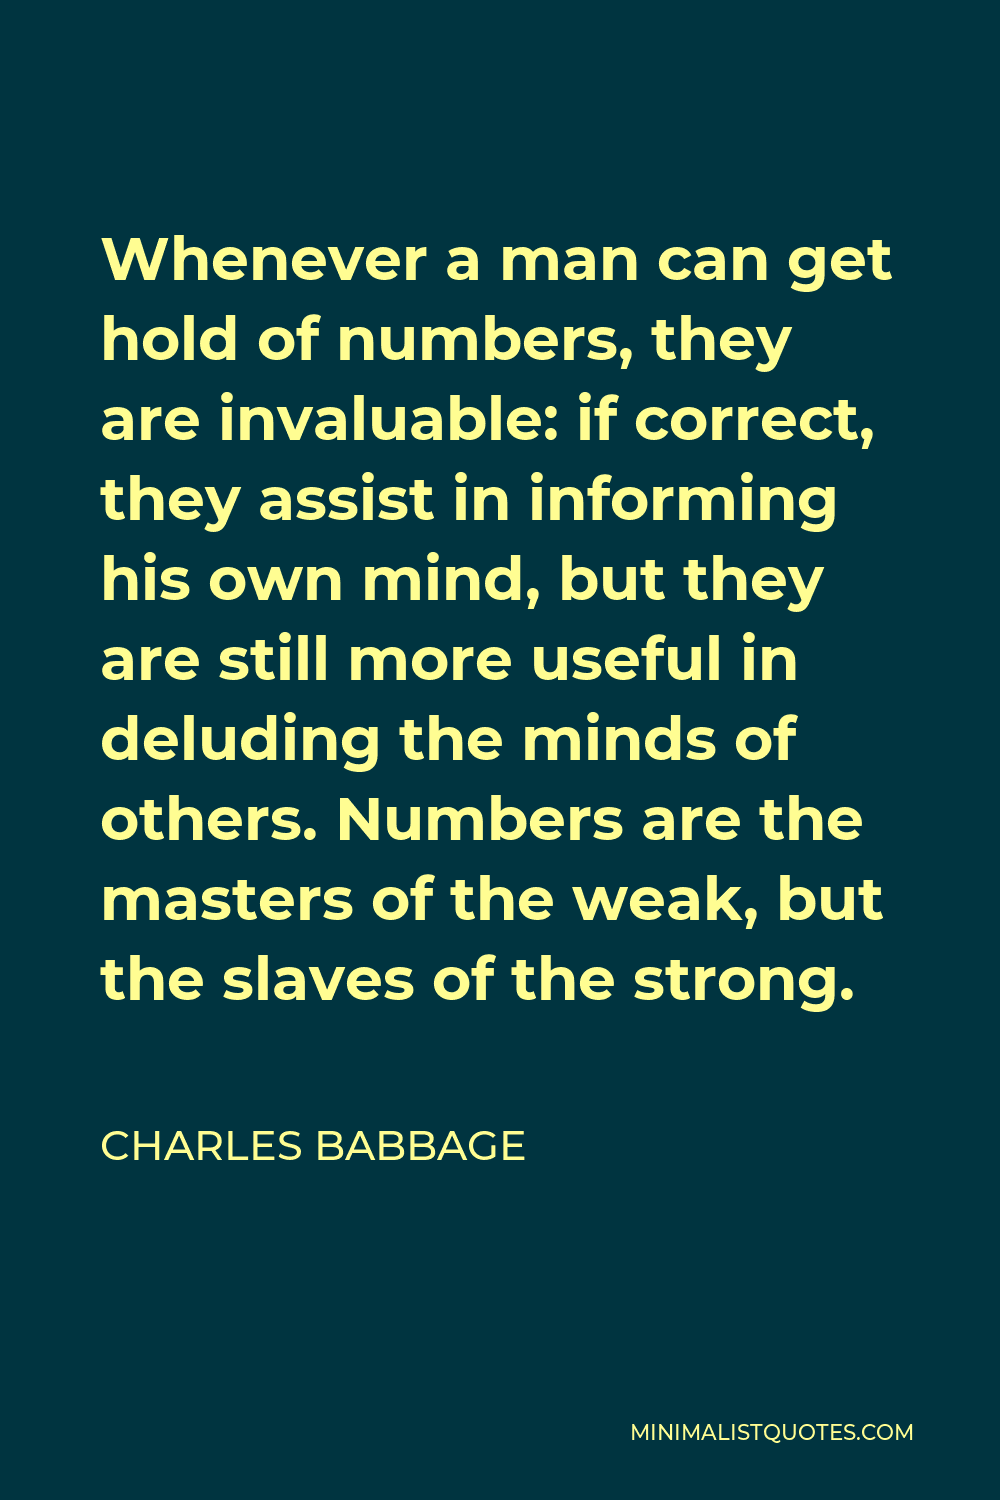 Charles Babbage Quote - Whenever a man can get hold of numbers, they are invaluable: if correct, they assist in informing his own mind, but they are still more useful in deluding the minds of others. Numbers are the masters of the weak, but the slaves of the strong.